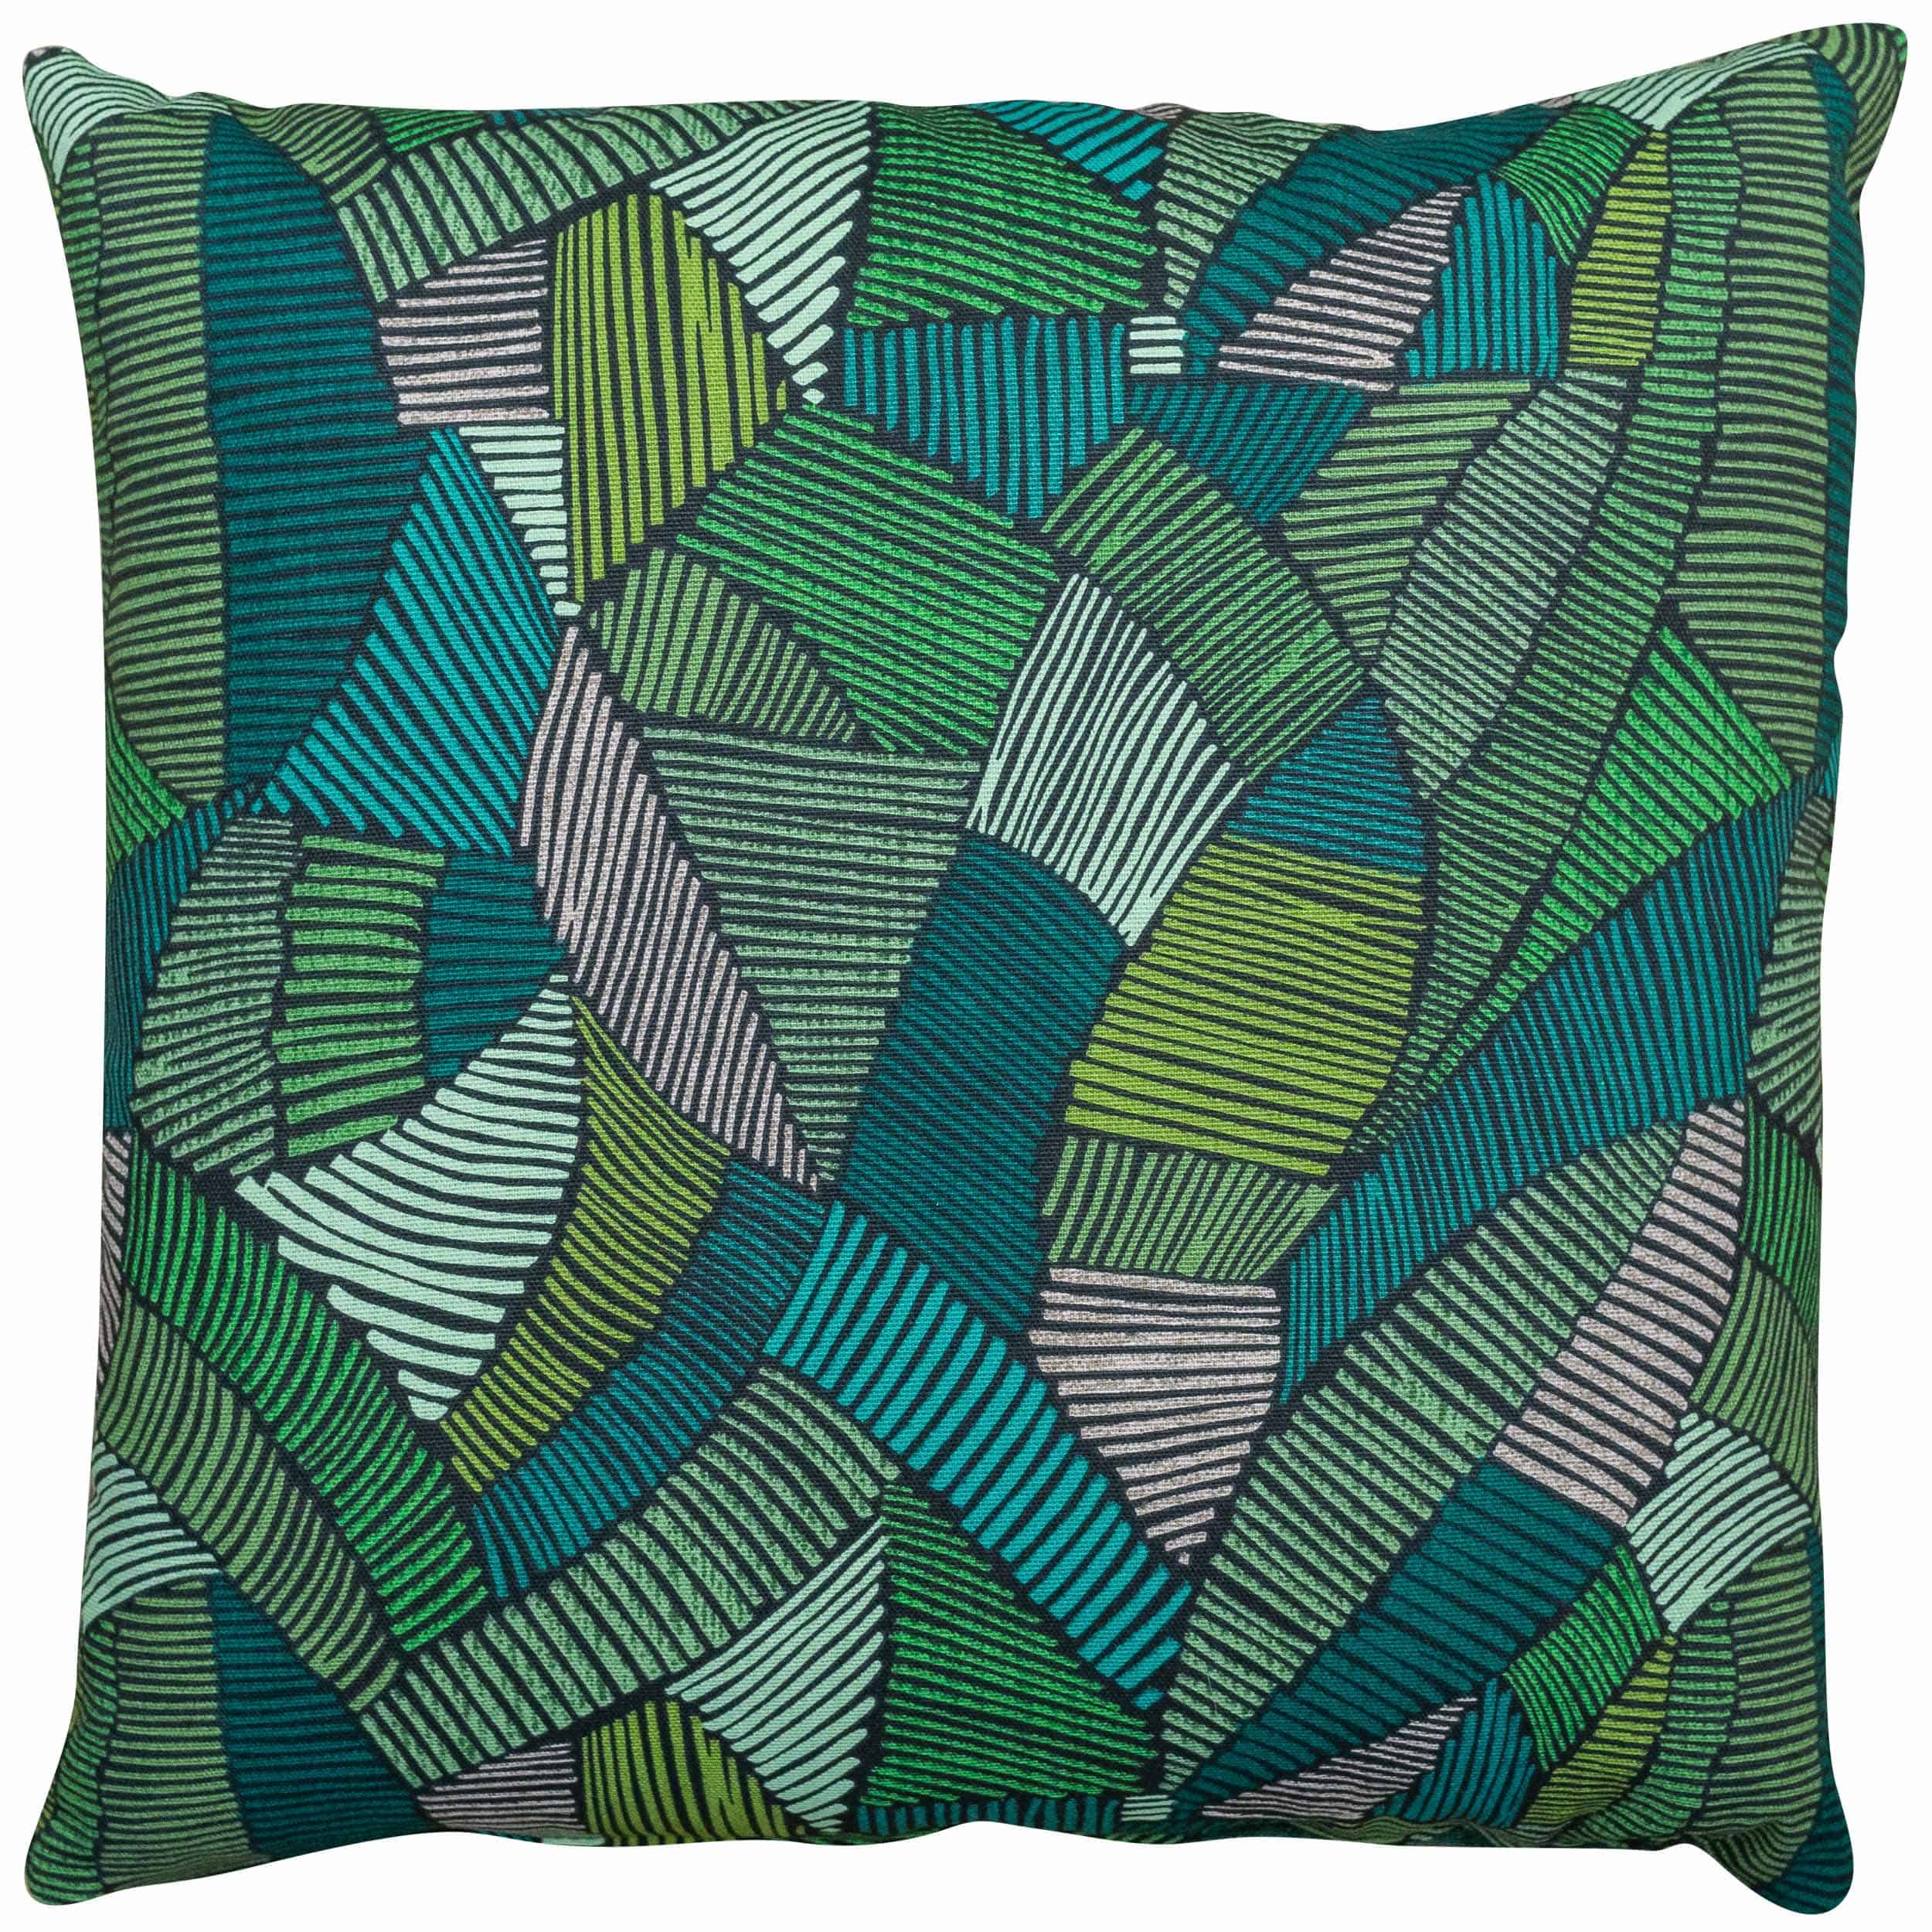 Botanic Abstract Leaf Cushion in Green